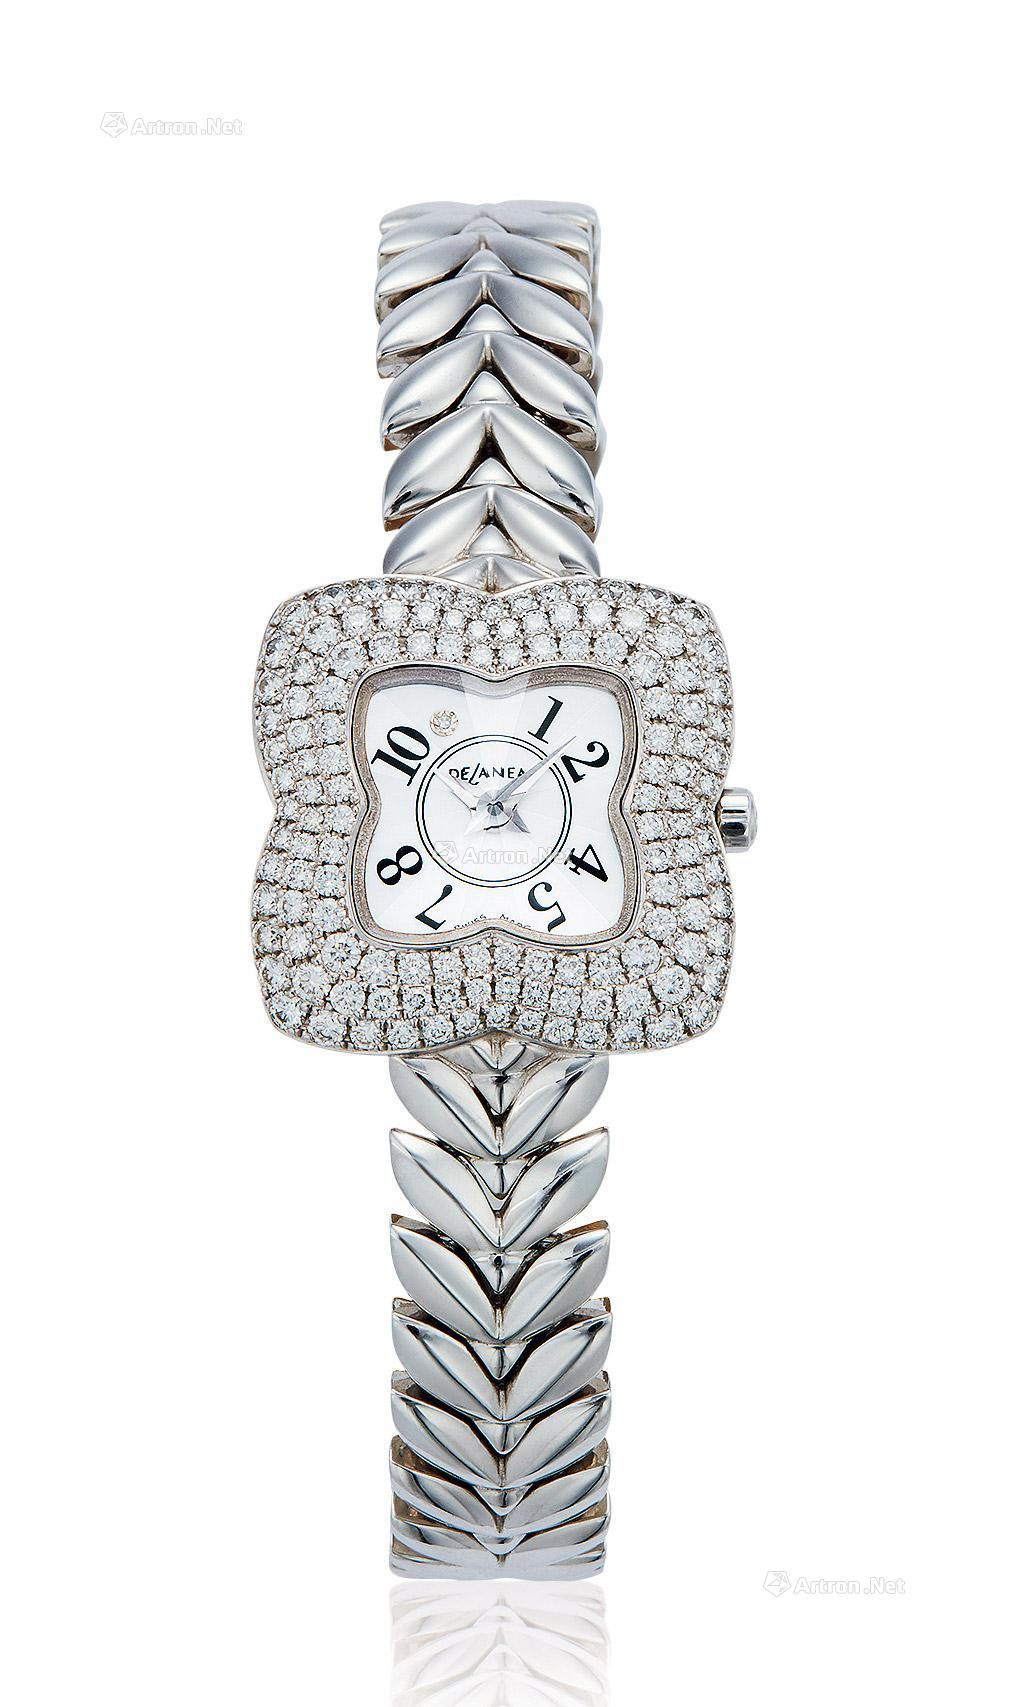 DELANEAU A LADY’S WHITE GOLD AND DIAMOND-SET WRISTWATCH WITH MOTHER-OF-PEARL DIAL